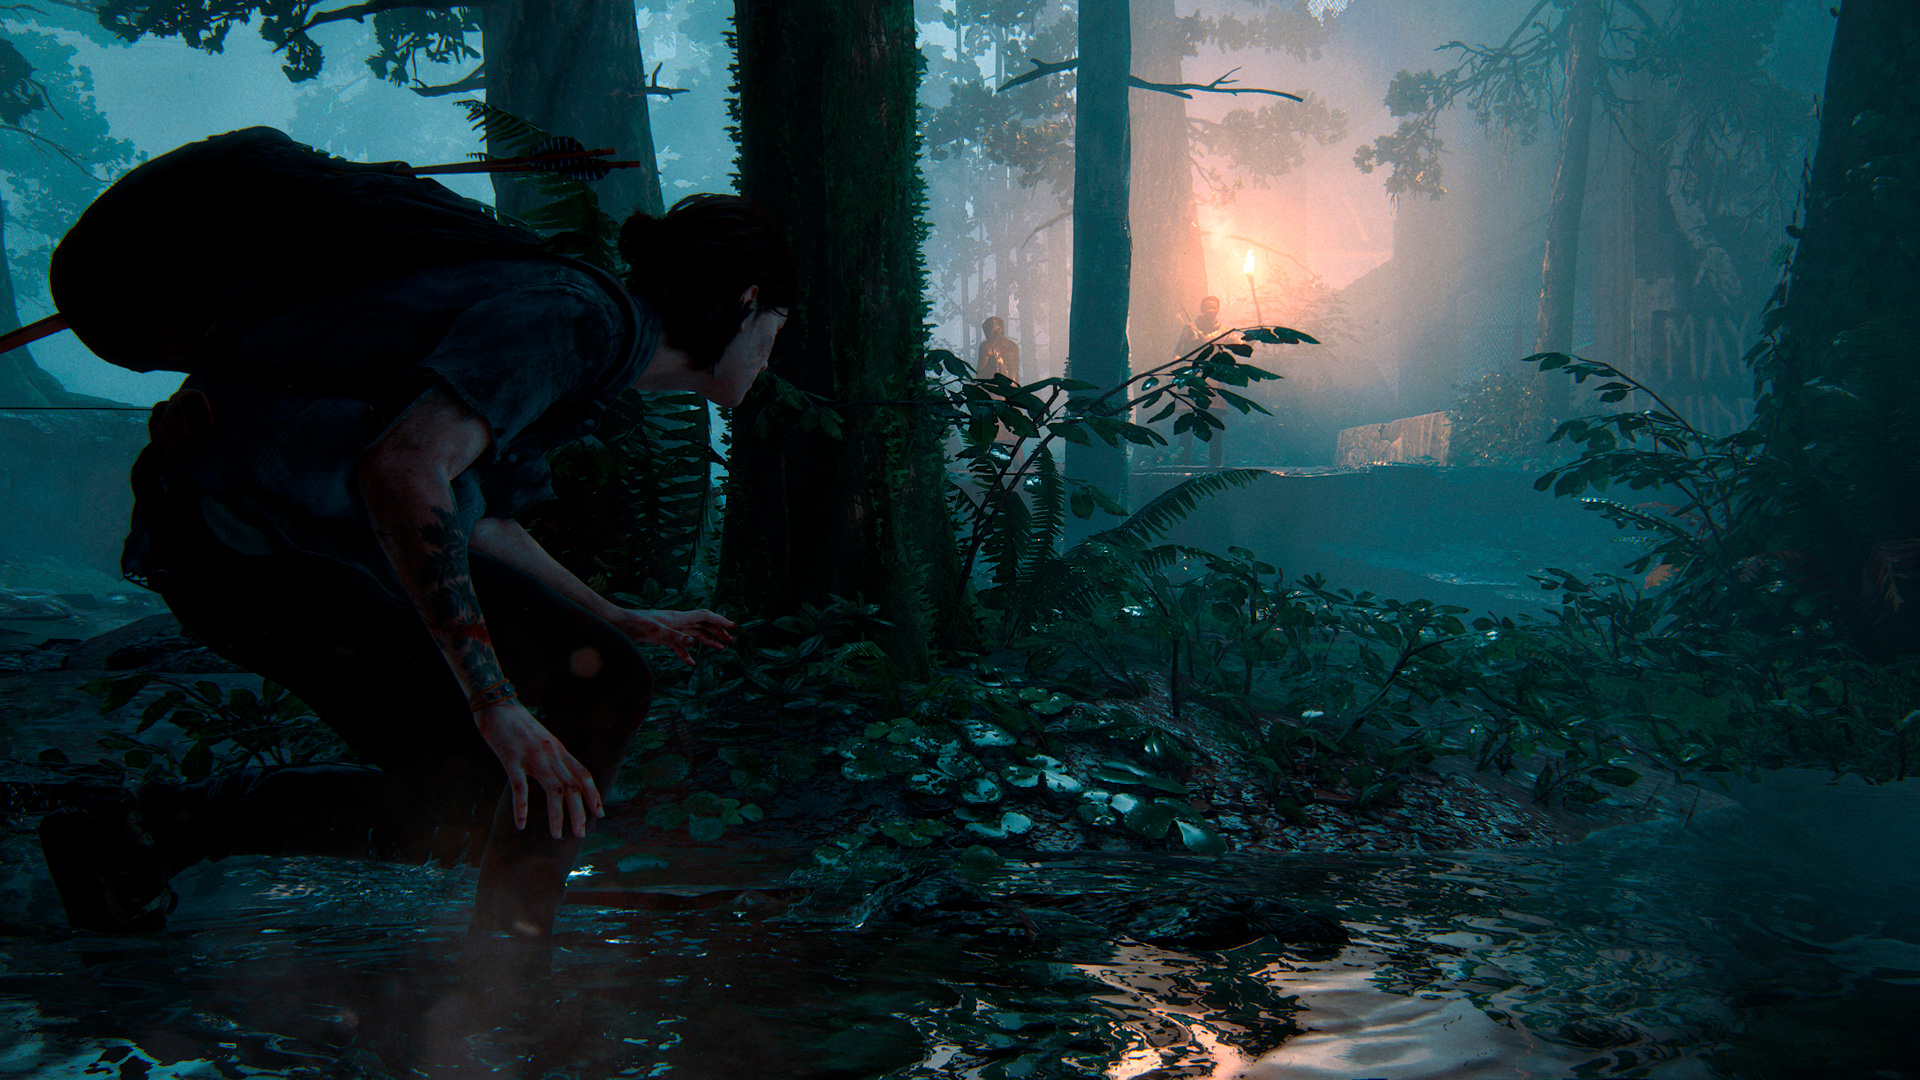 Last of us playstation 4 exclusive